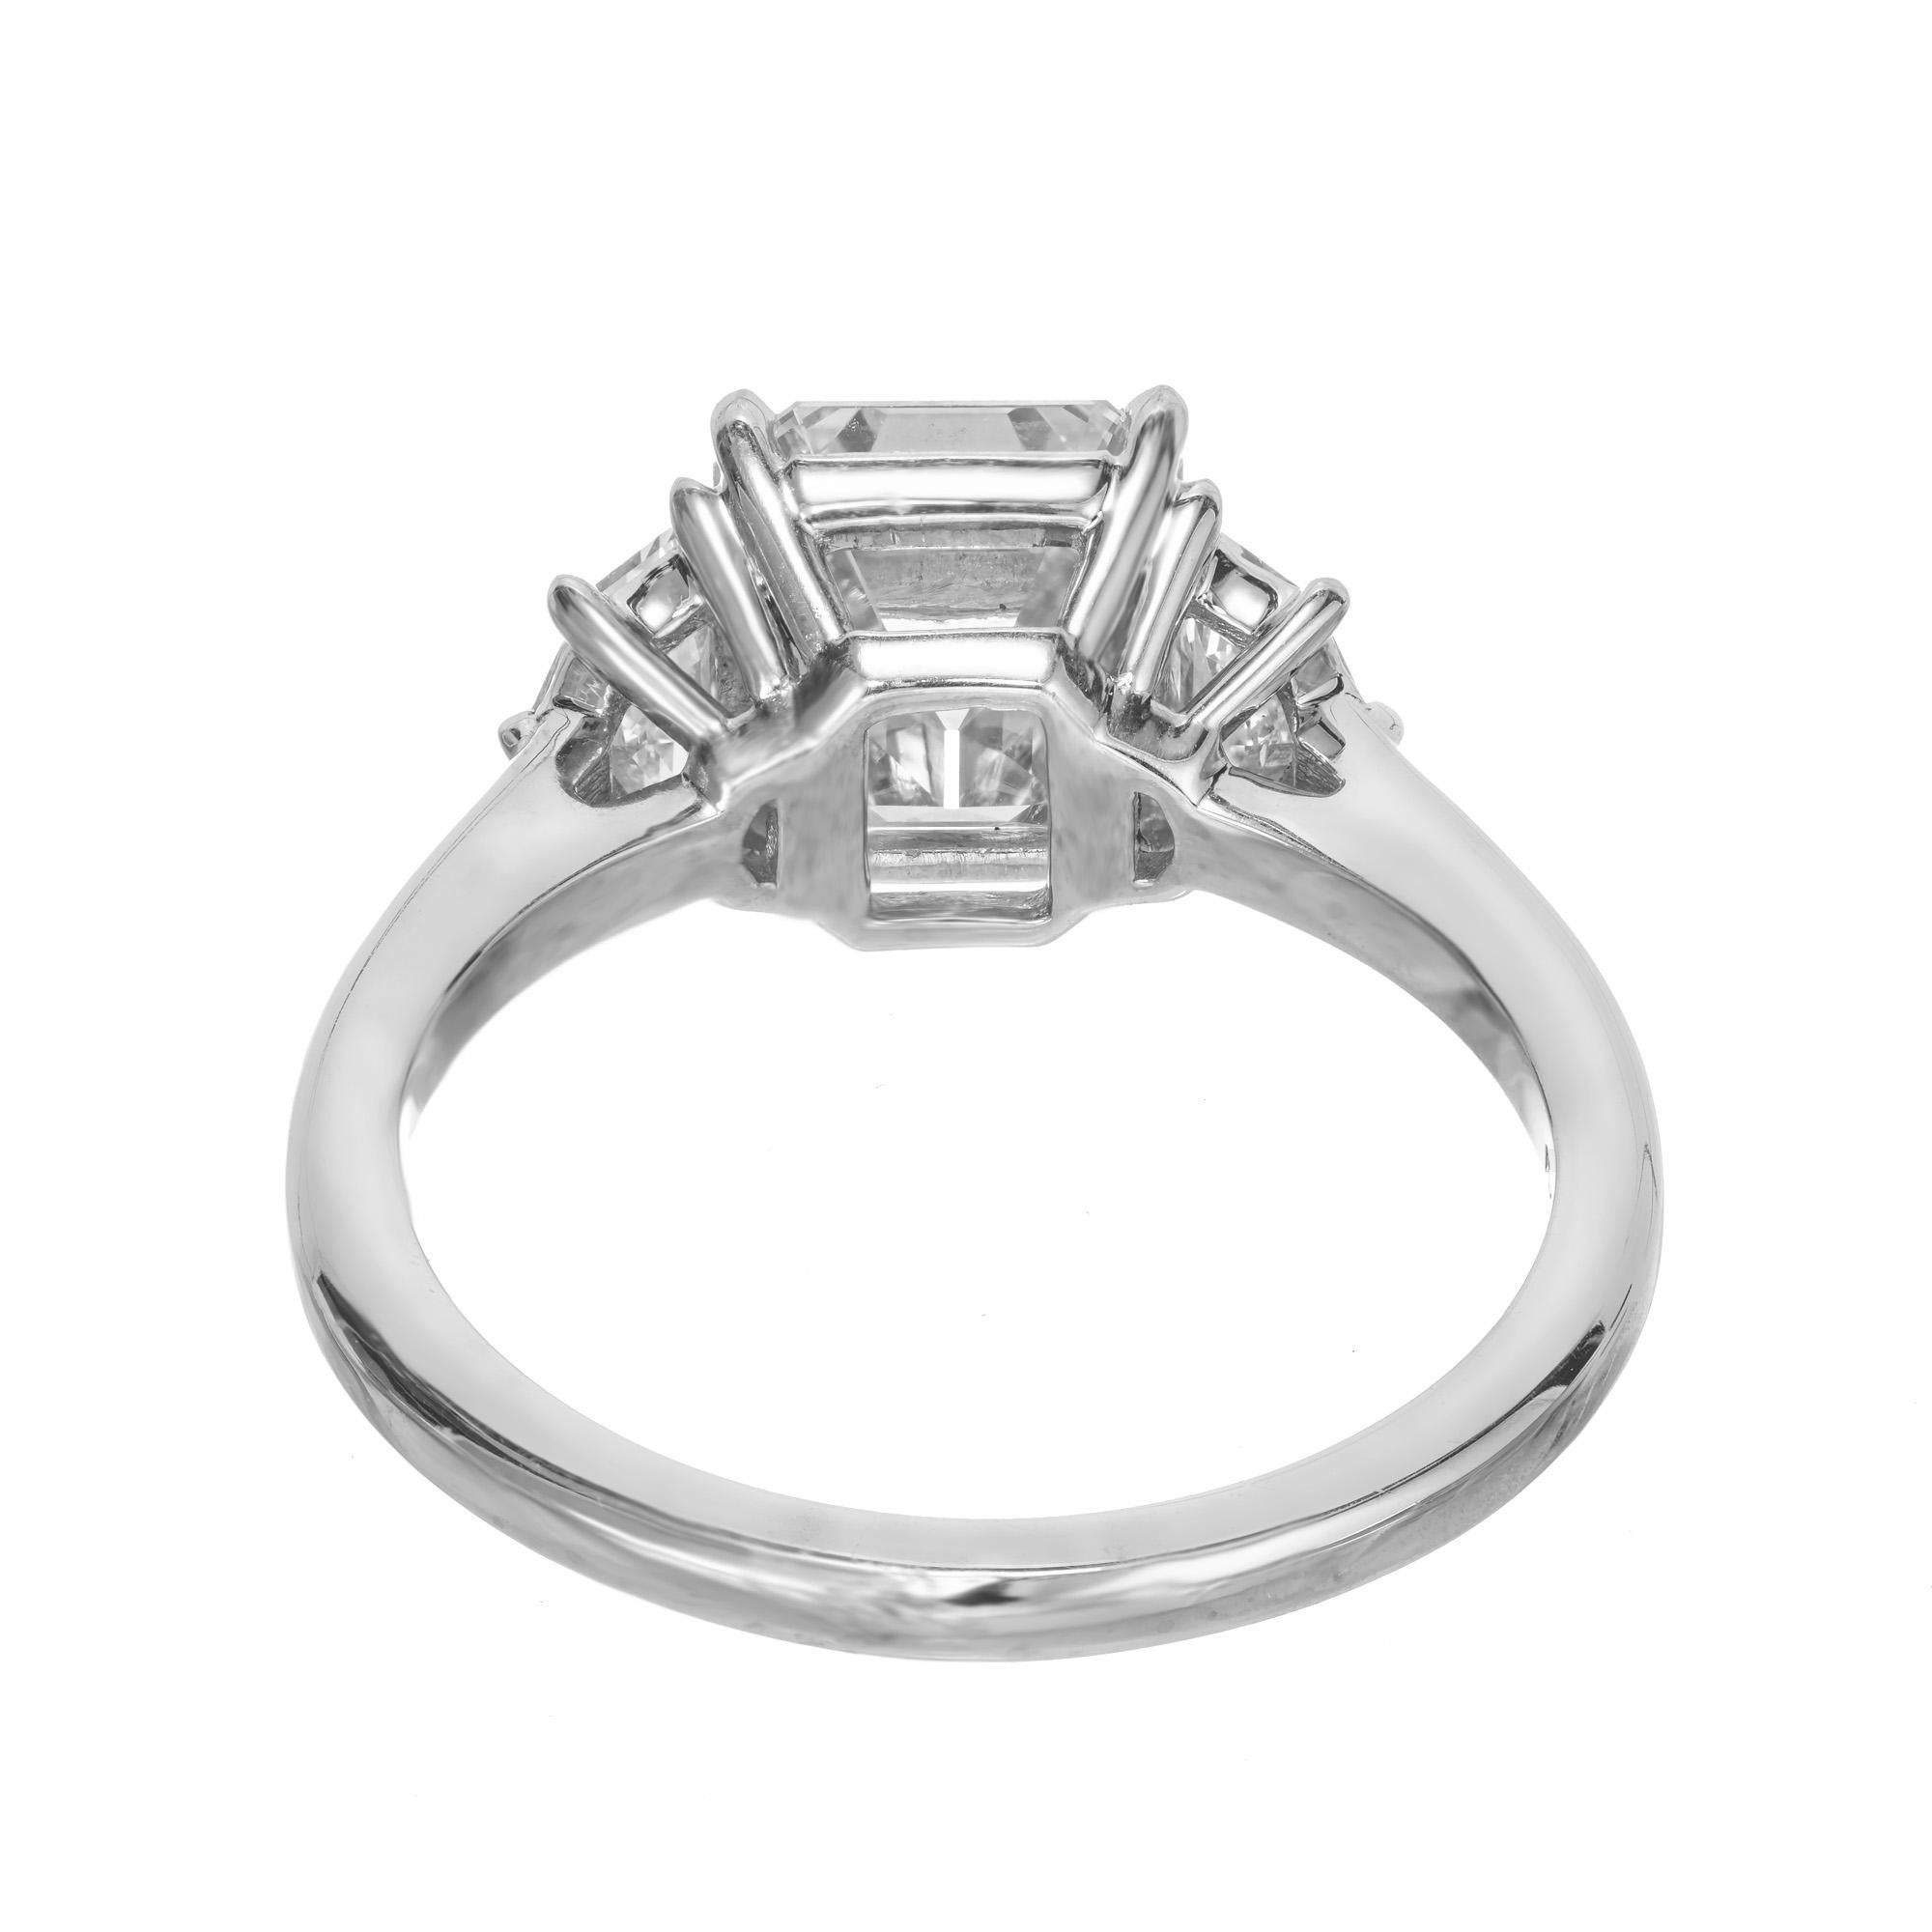 Peter Suchy GIA Certified 2.32 Carat Diamond Platinum Ring For Sale 1